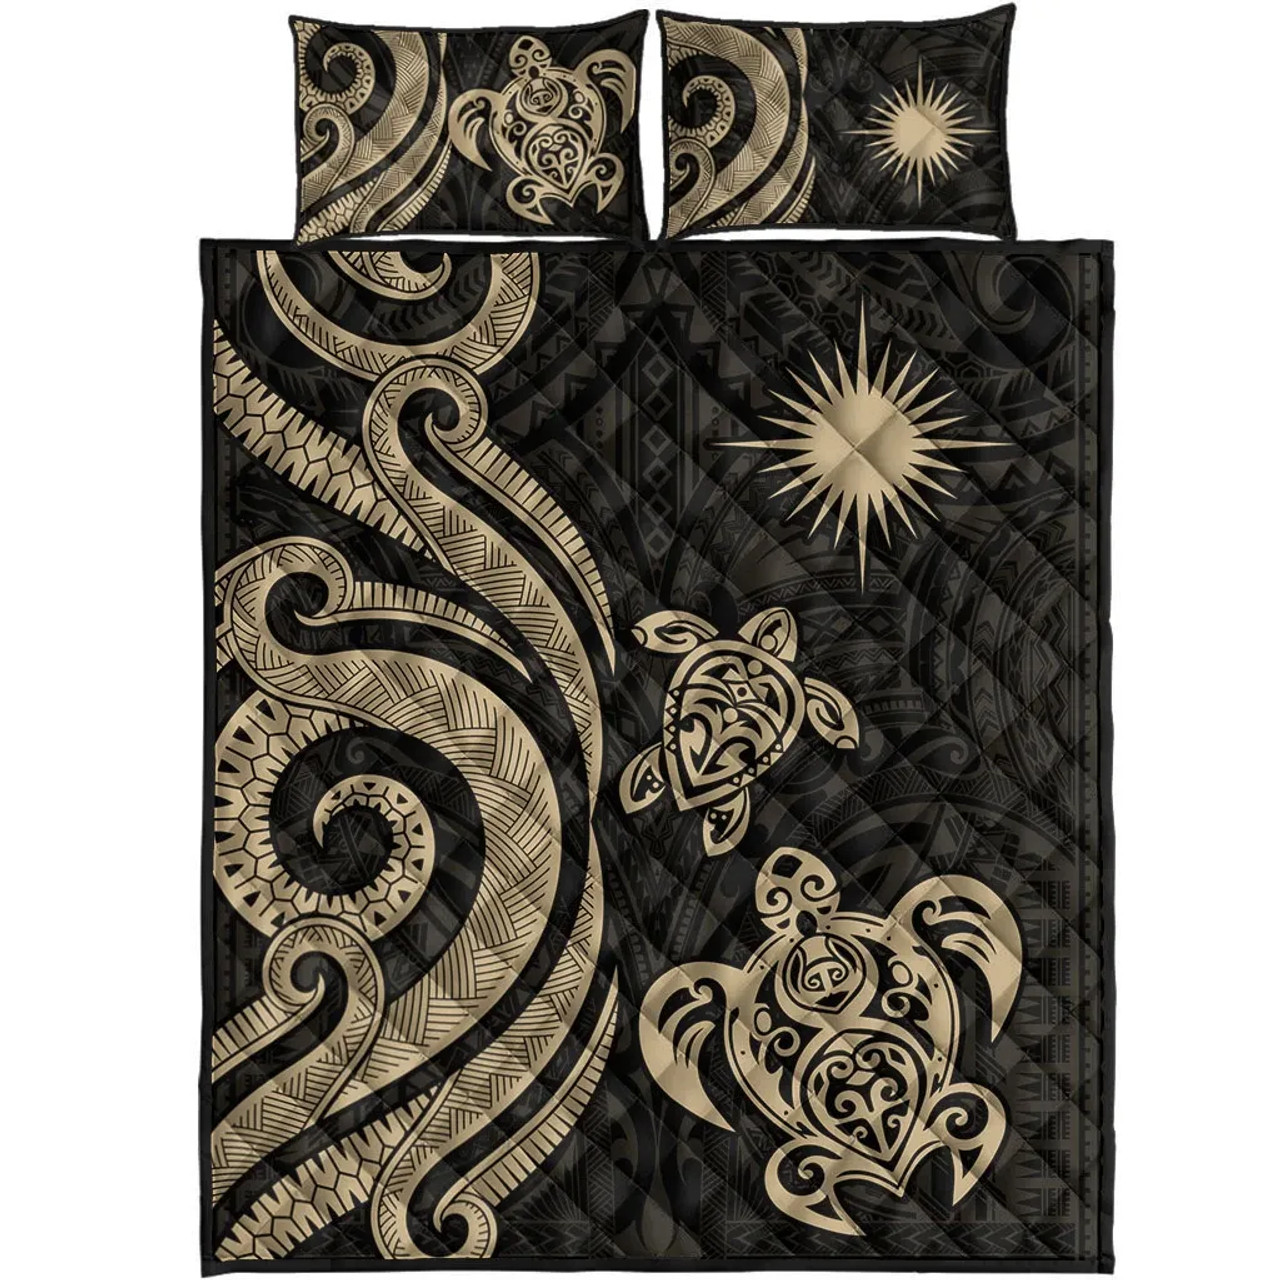 Marshall Islands Quilt Bed Set - Gold Tentacle Turtle 5